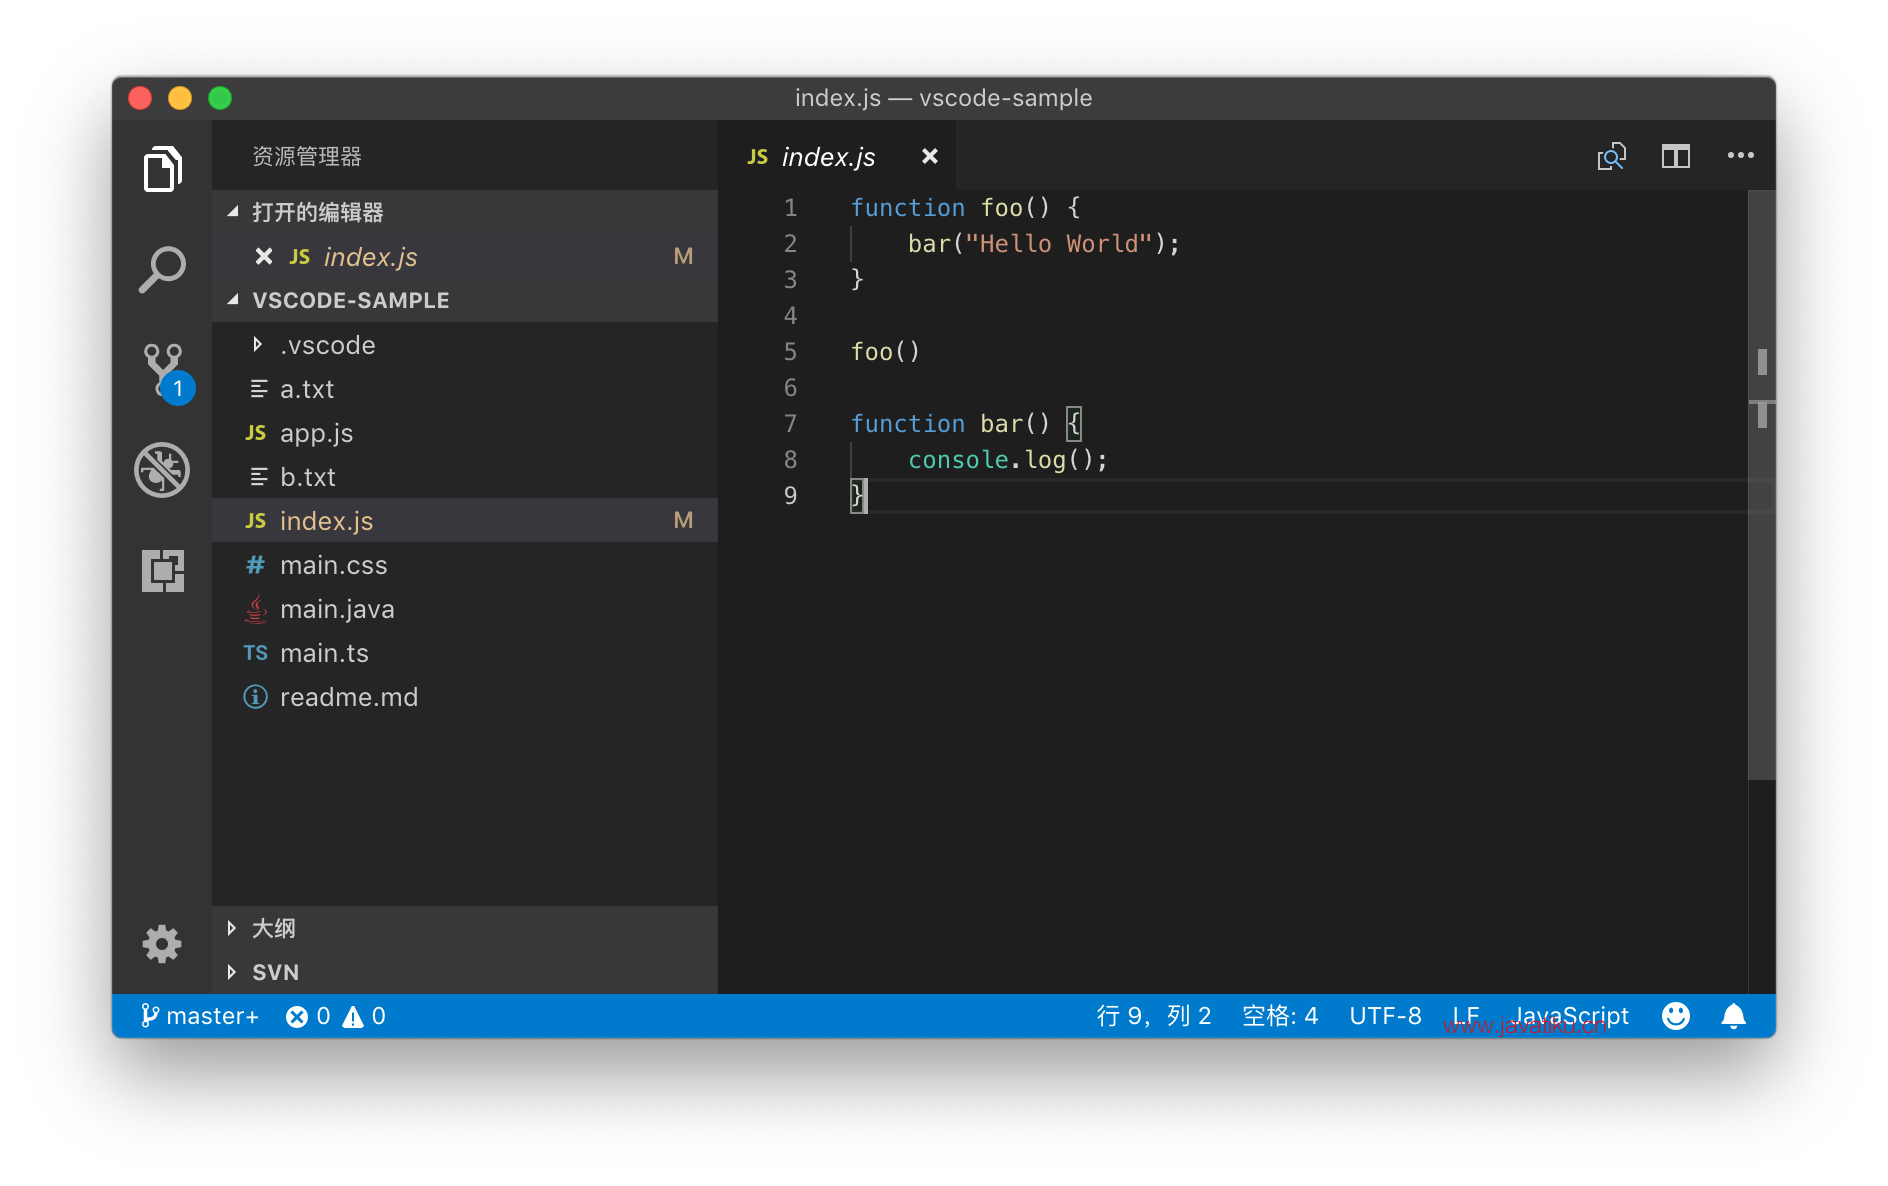 vscode-vc-status-bar-and-resource-manager-02.png